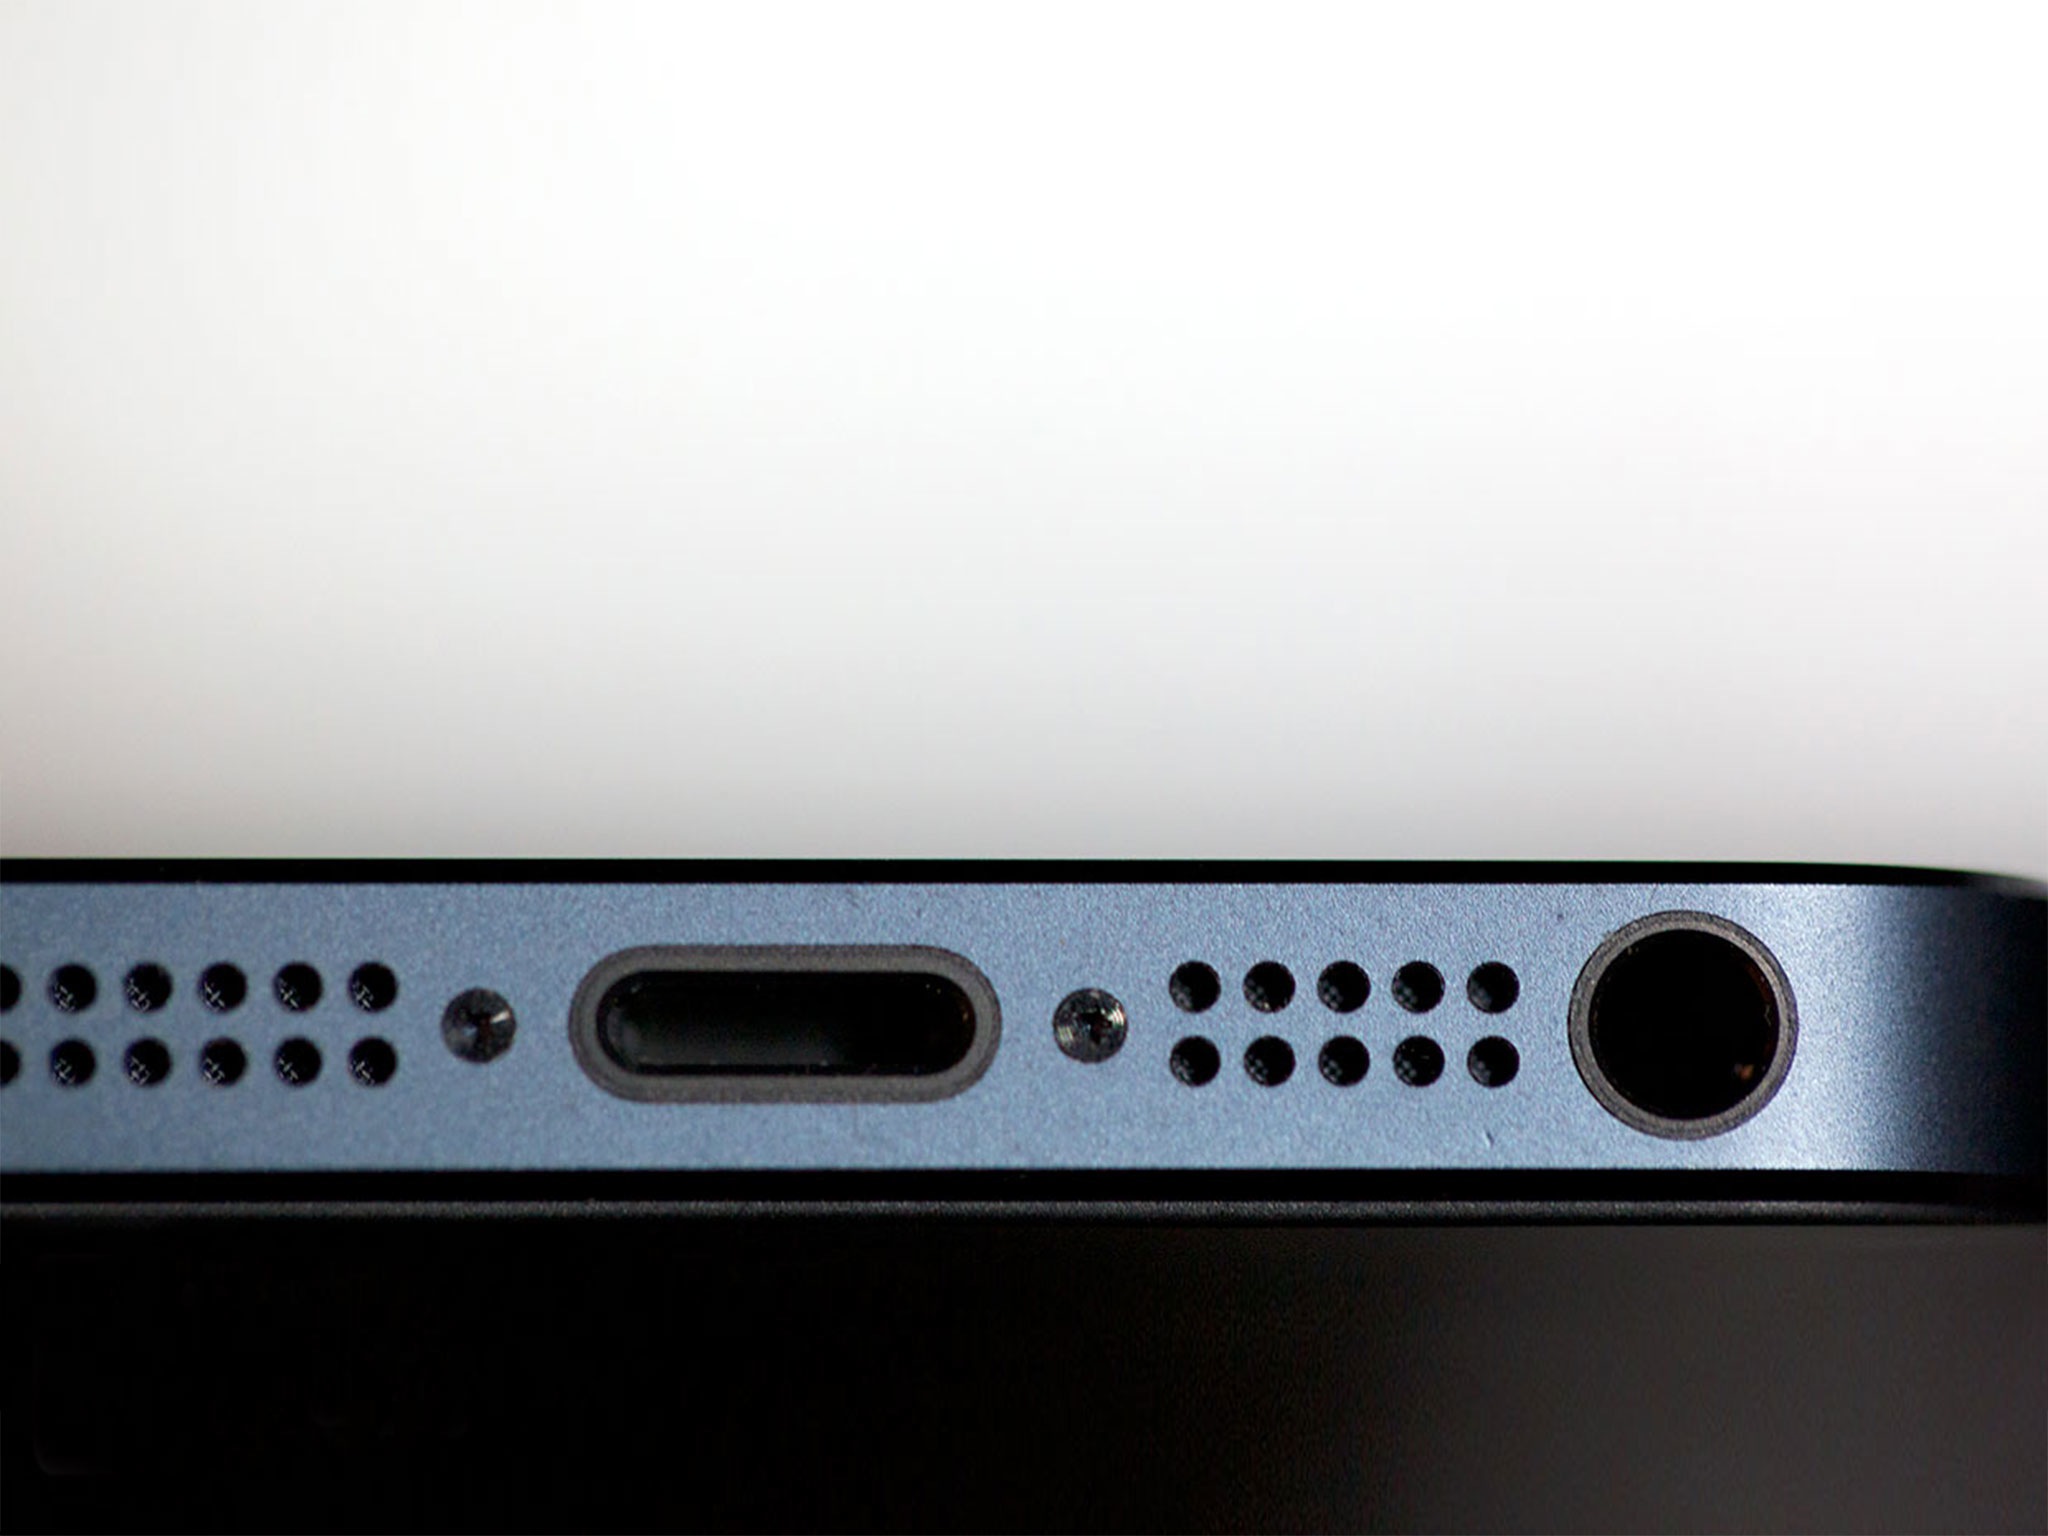 How to replace a blown loud speaker in an iPhone 5